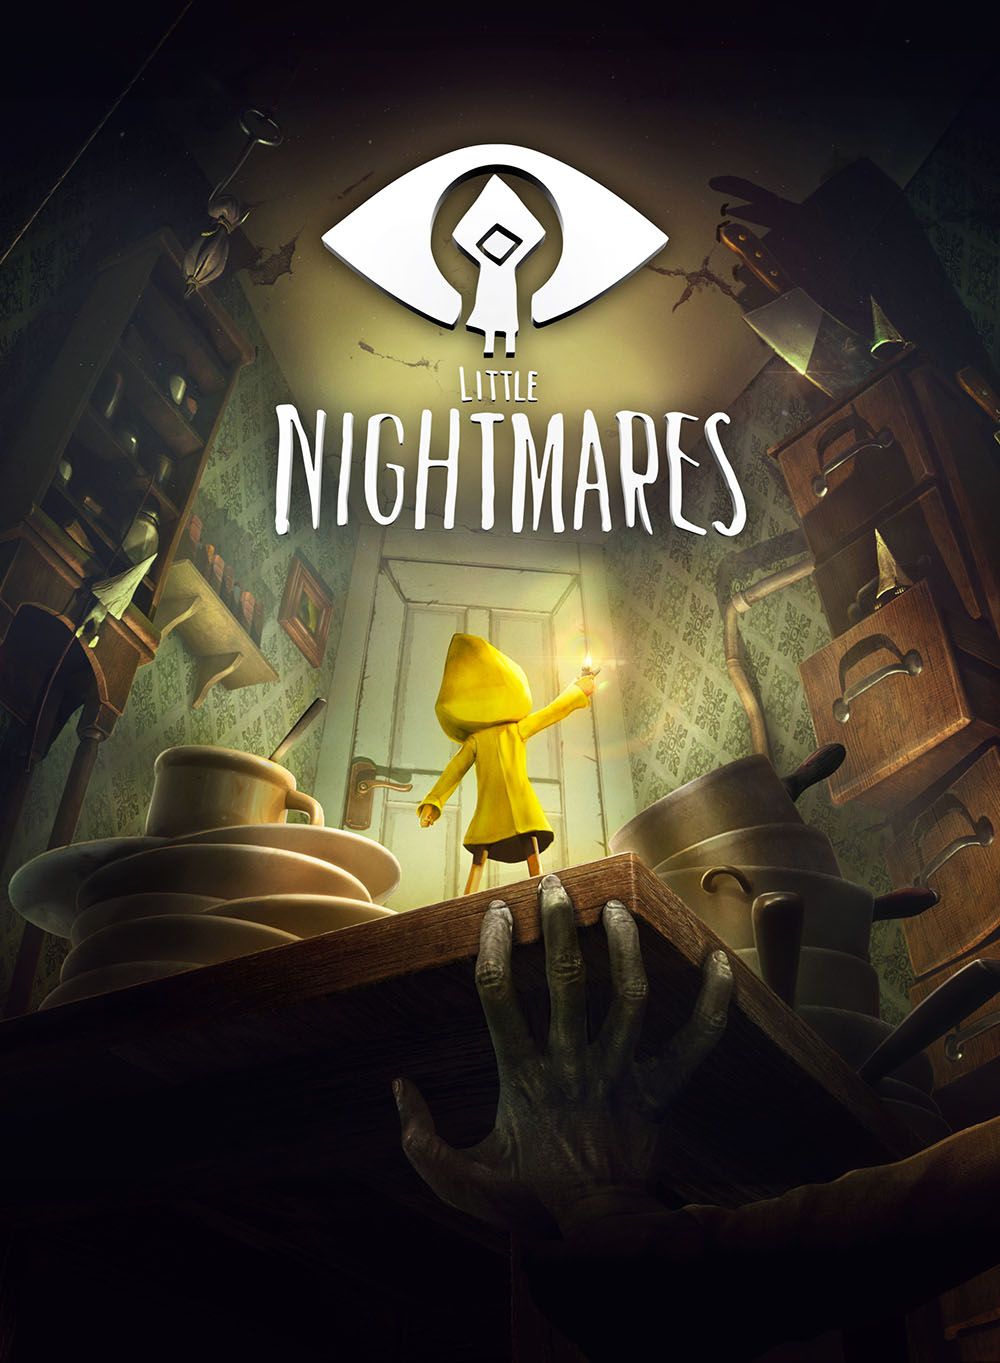 What Is The Teacher S Name In Little Nightmares 2